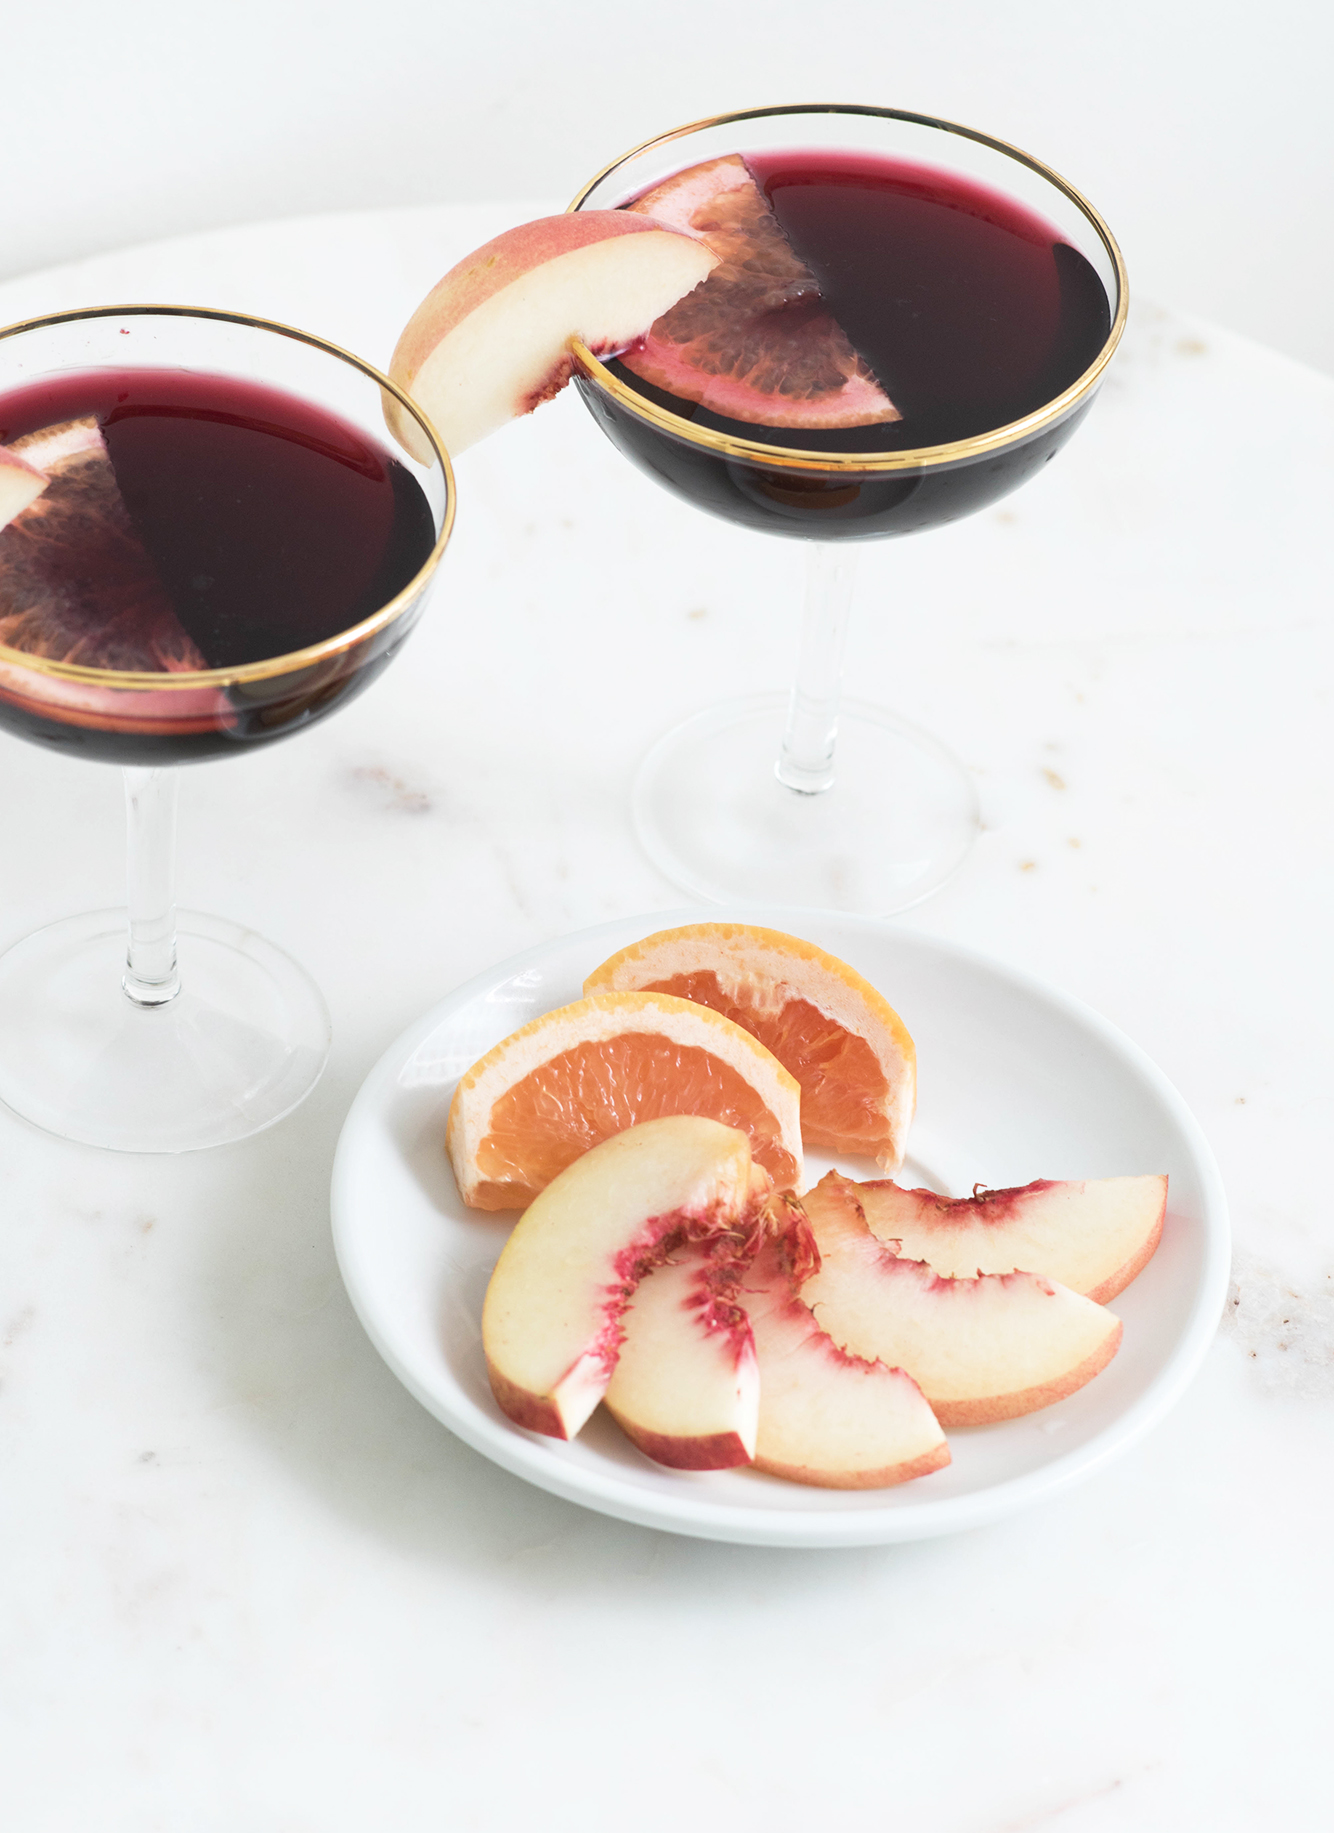 coco-and-vera-best-vancouver-lifestyle-blog-best-canadian-lifestyle-blog-top-blogger-summer-sangria-recipe-apothic-red-citrus-peach-sangria-how-to-make-sangria